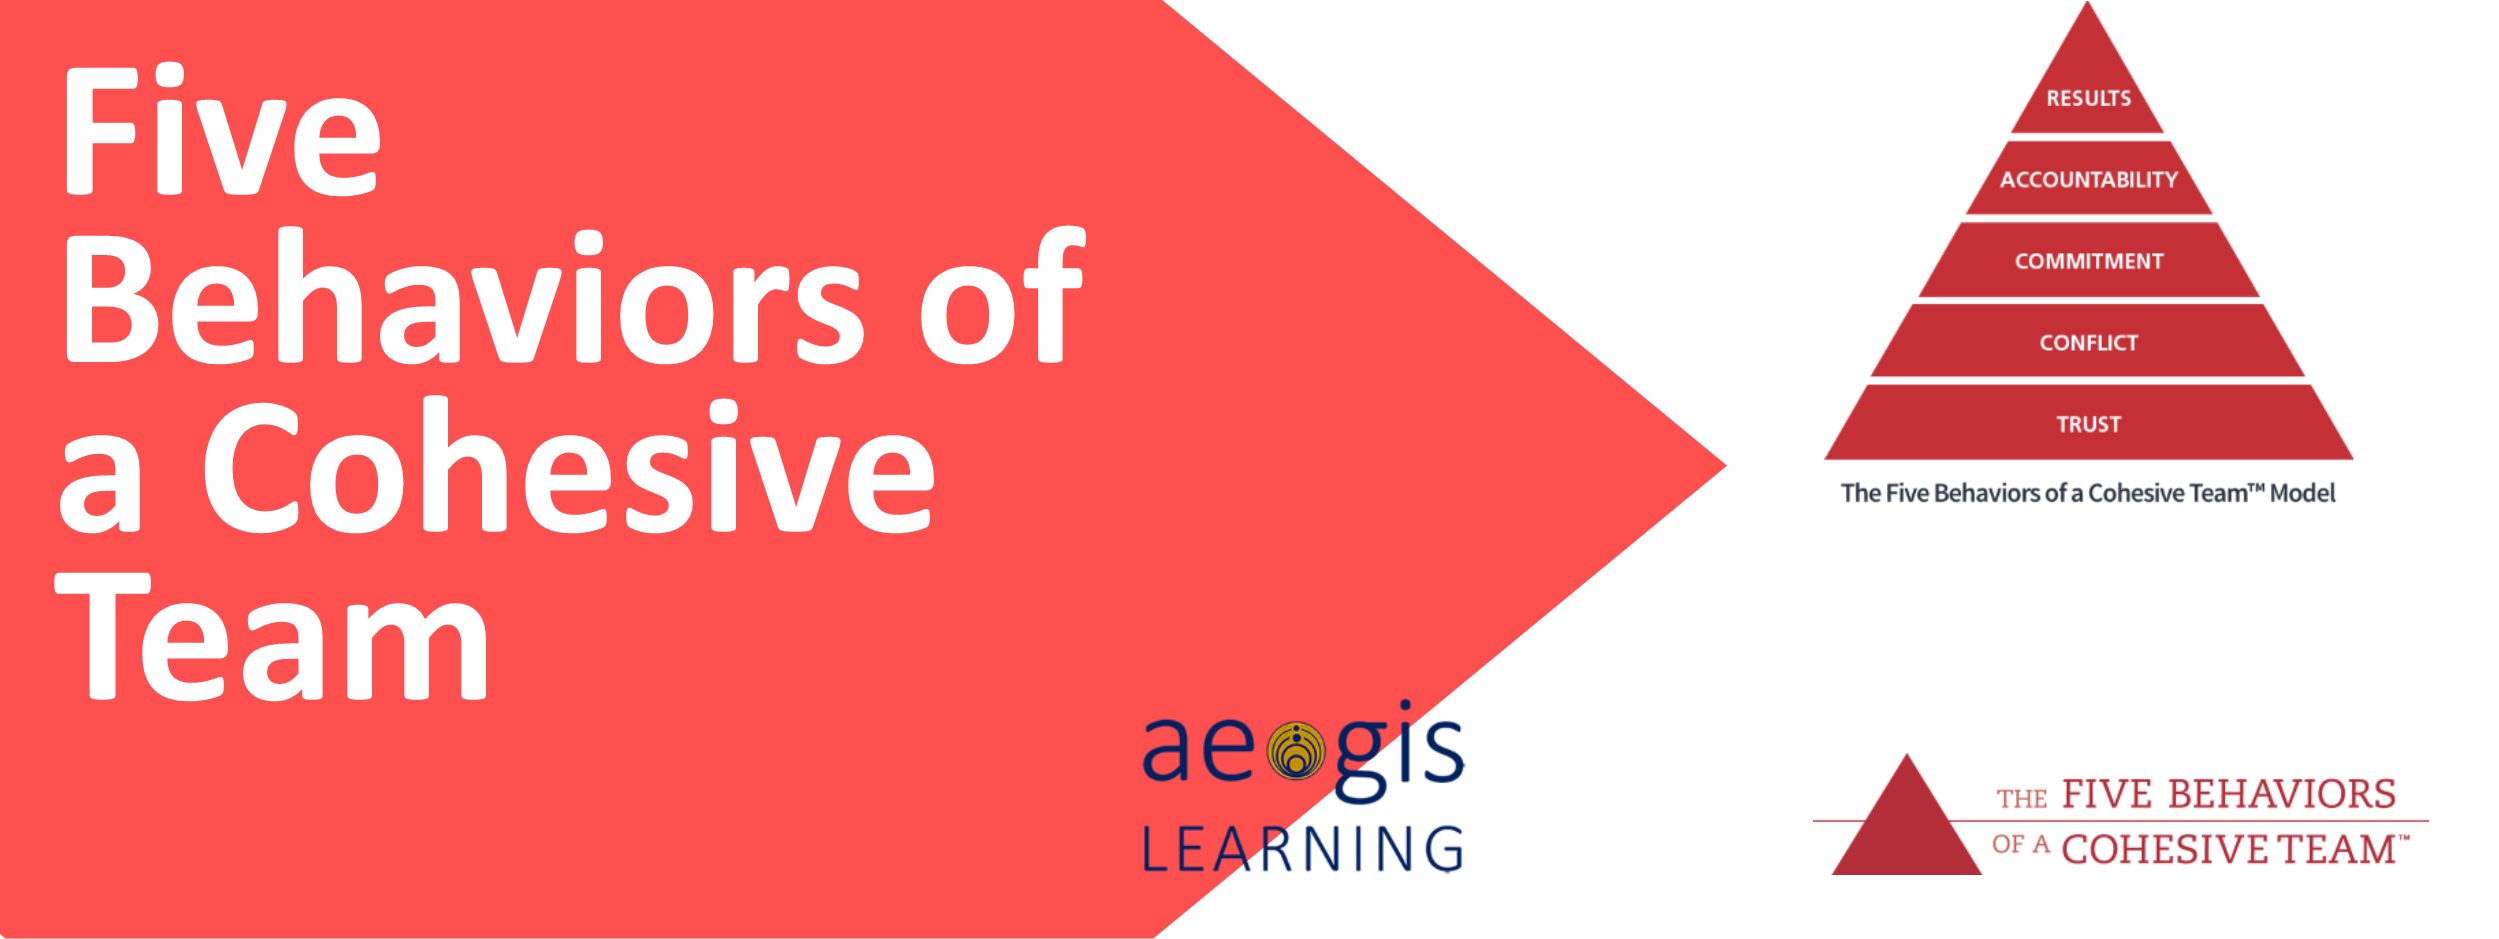 Five Behaviors of a Cohesive Team - Aegis Learning